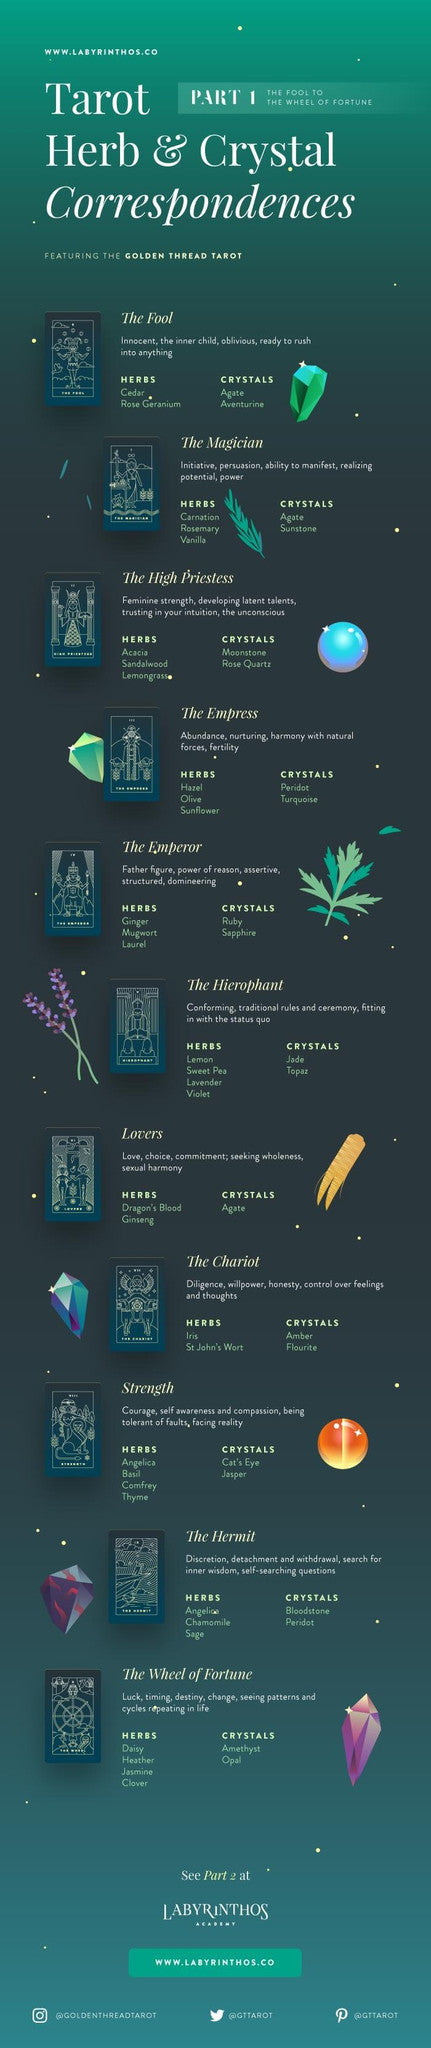 Full Infographic - Crystals, Tarot and Herbal Correspondences Chart - Part 1: From the Fool to the Wheel of Fortune